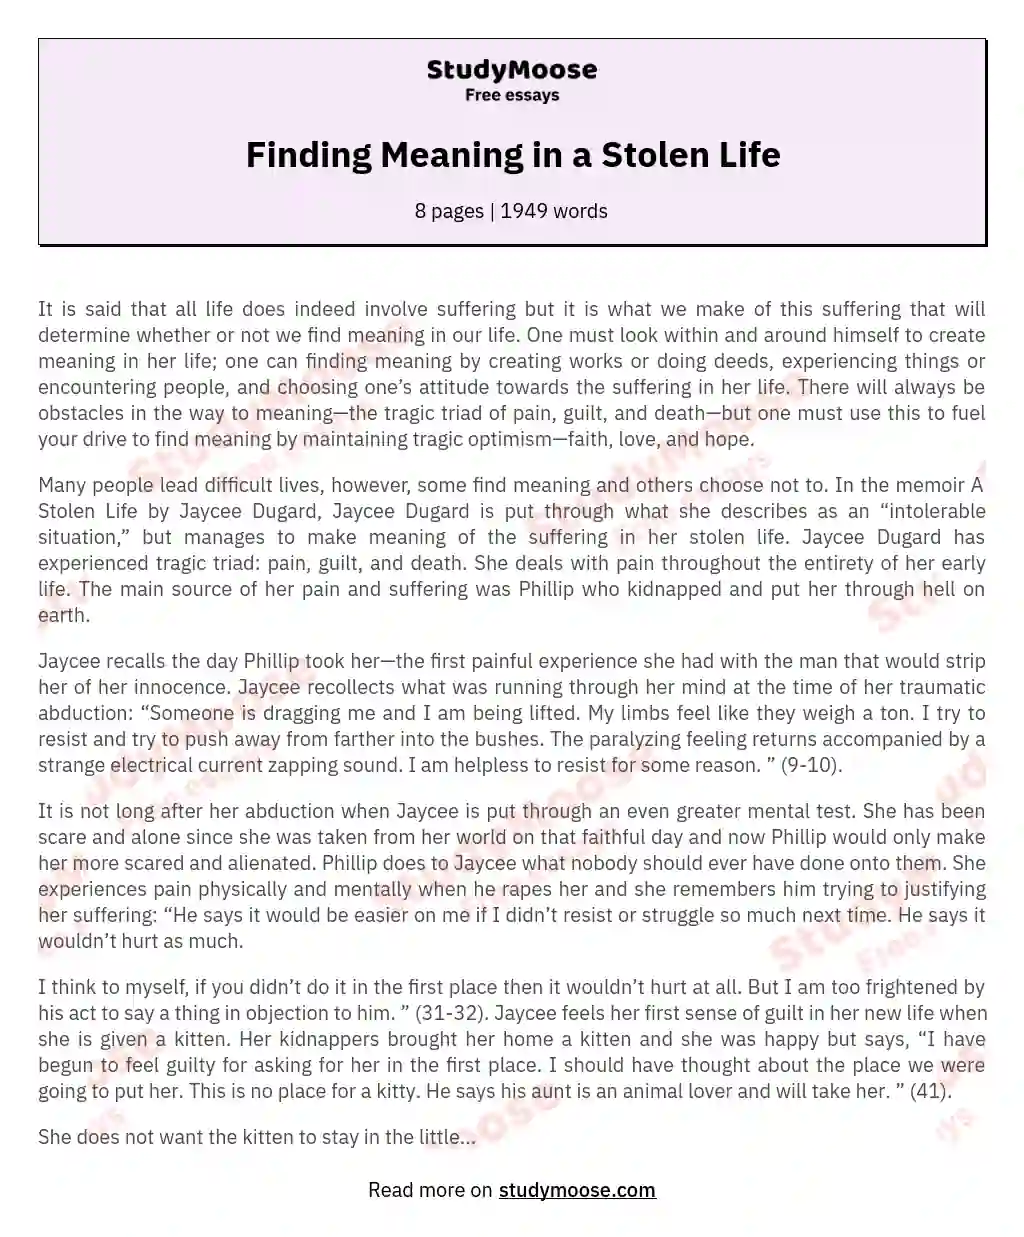 Finding Meaning in a Stolen Life essay